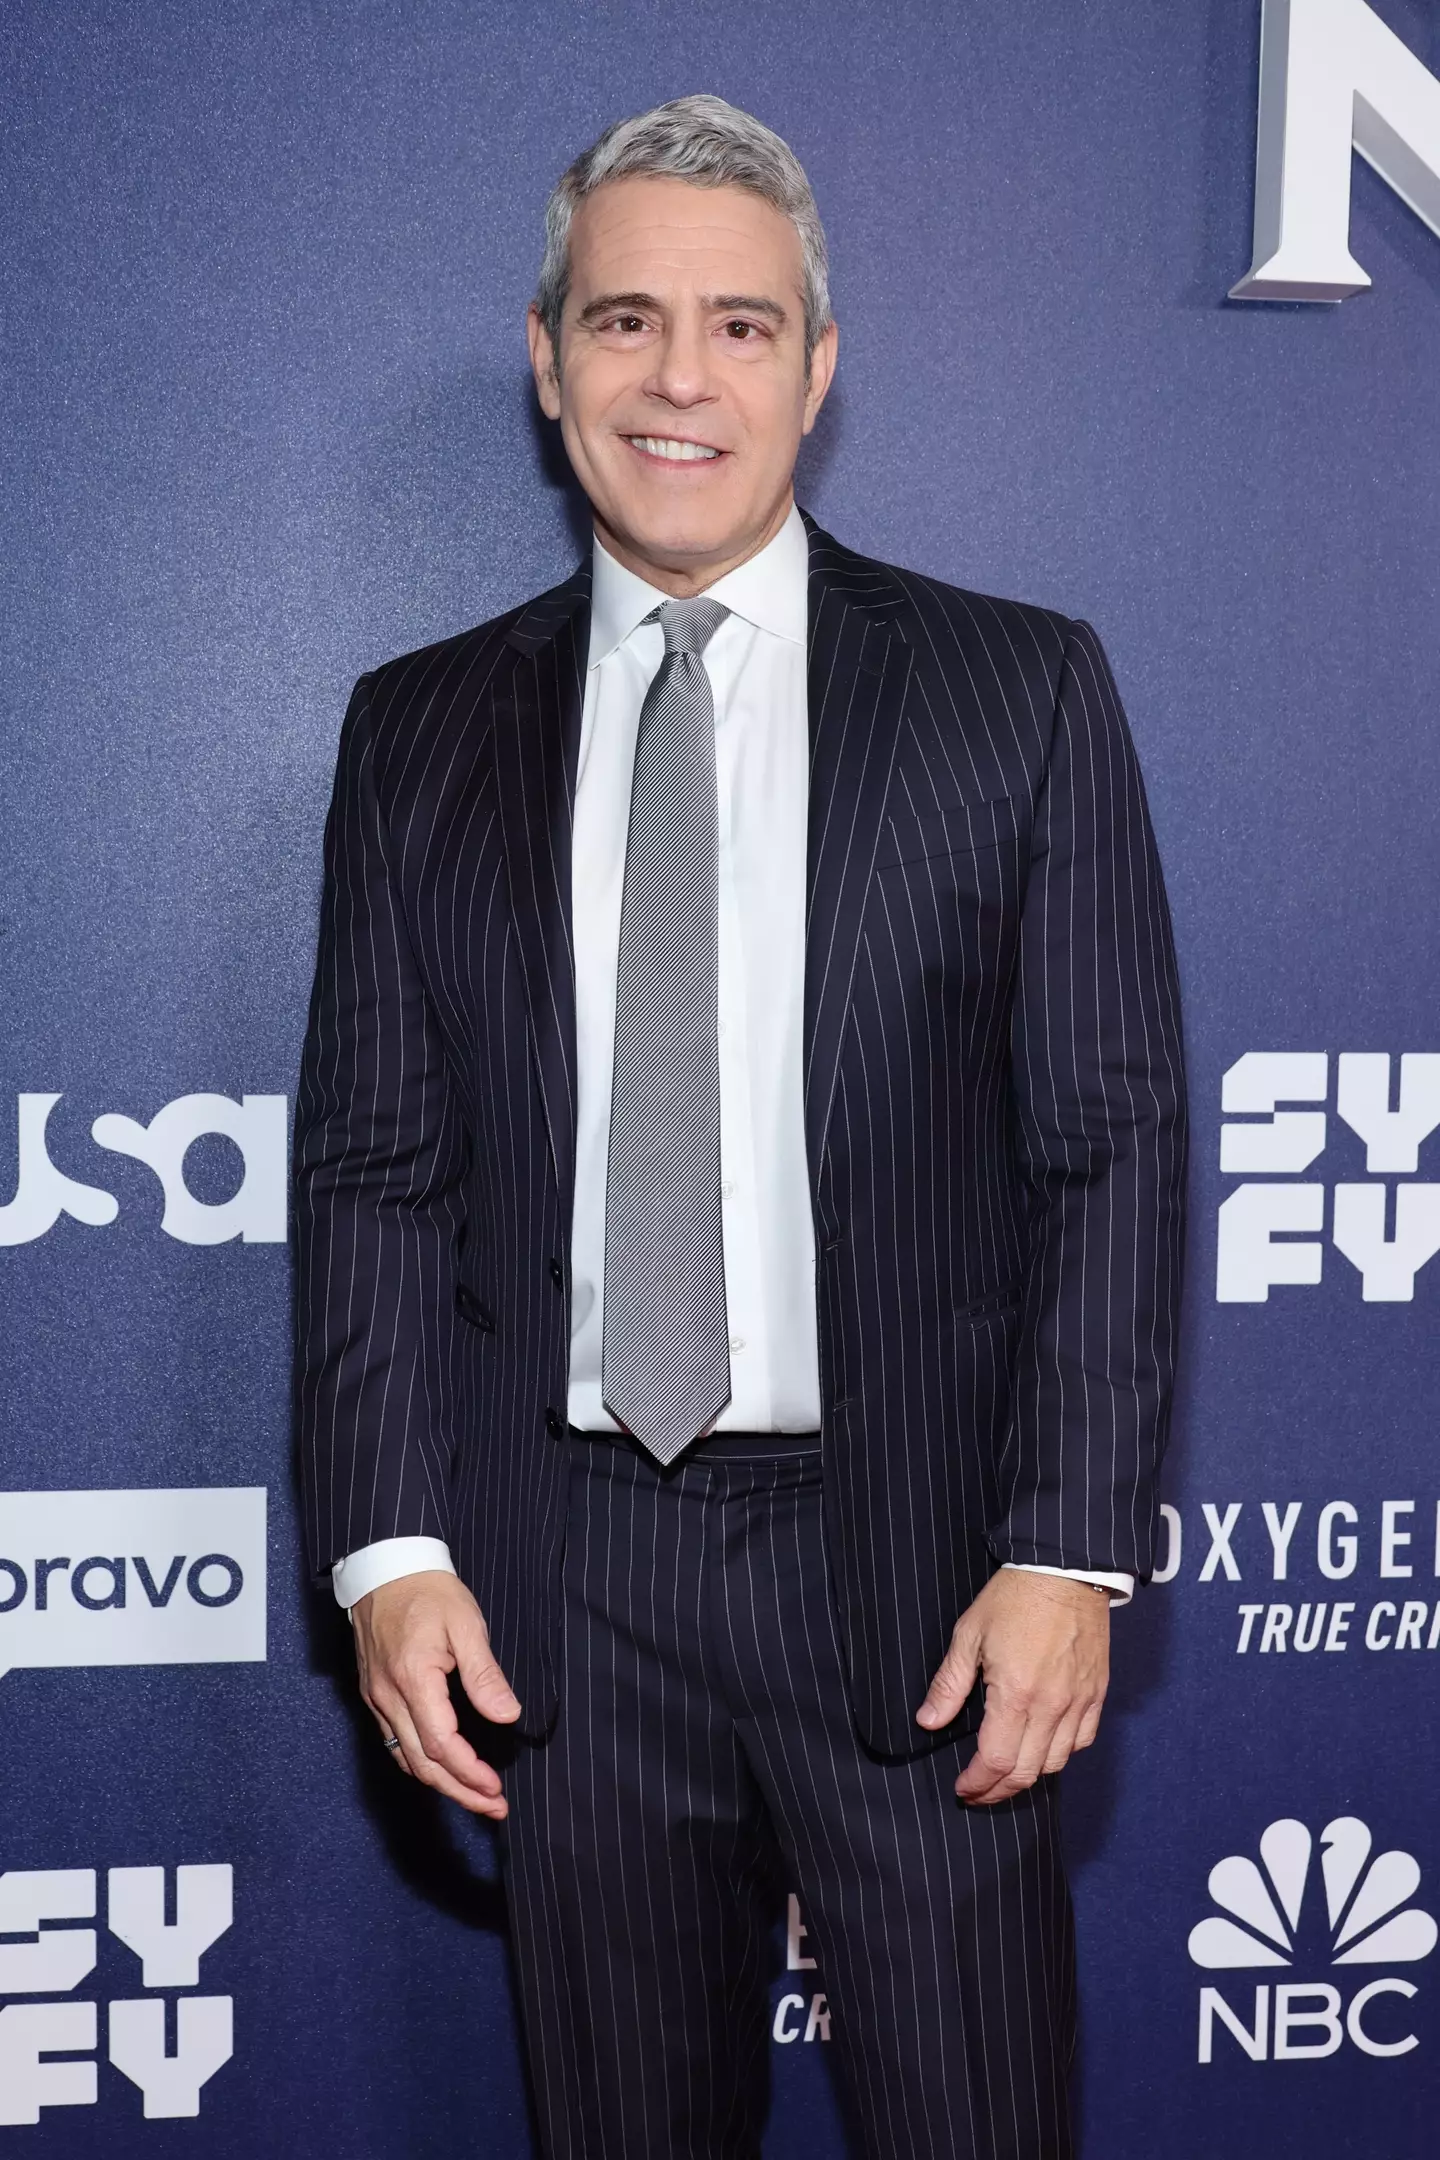 Andy Cohen described the situation as 'creepy'.